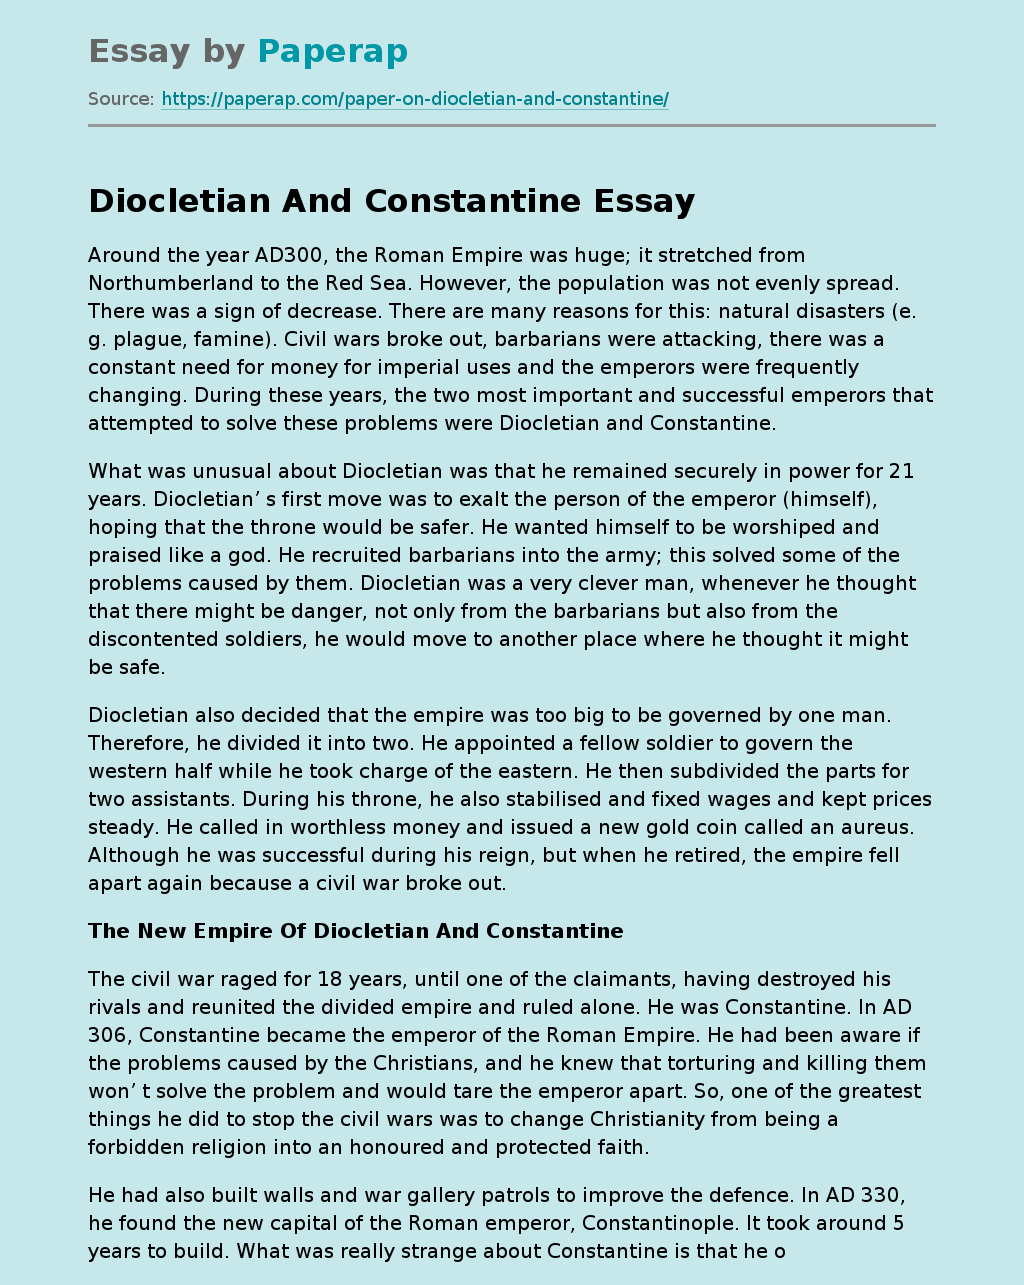 Diocletian And Constantine